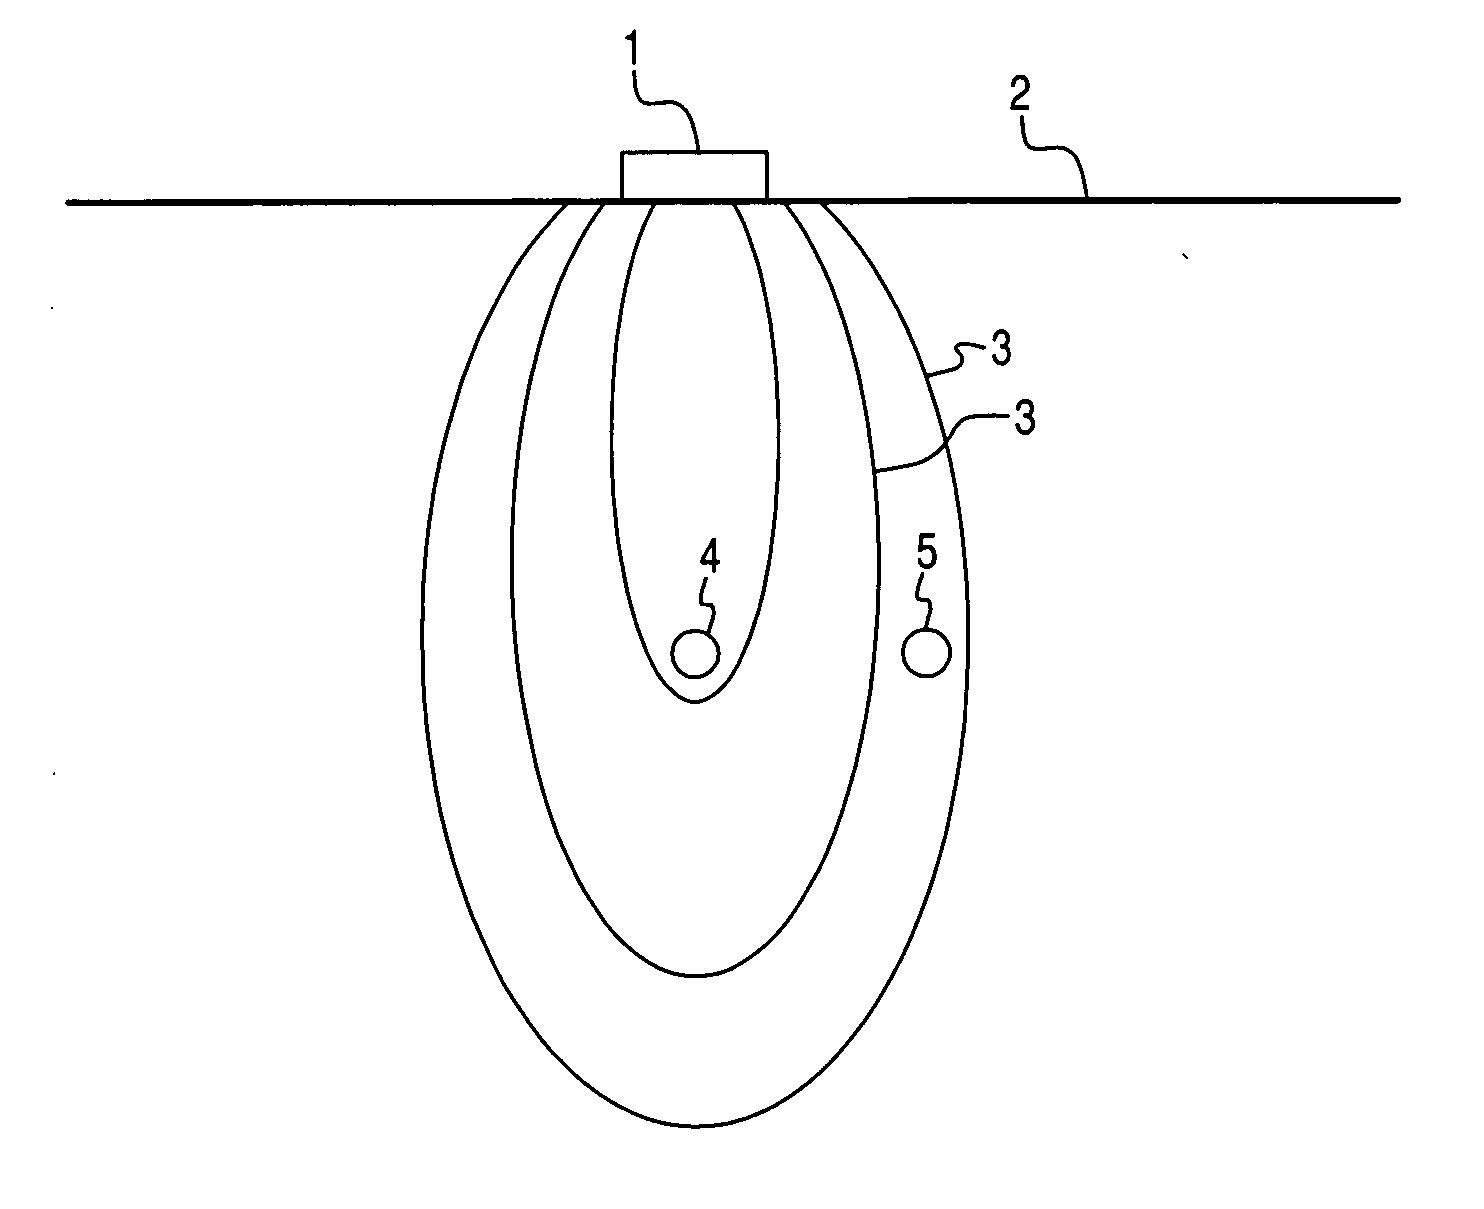 Active electrode, bio-impedance based, tissue discrimination system and methods of use